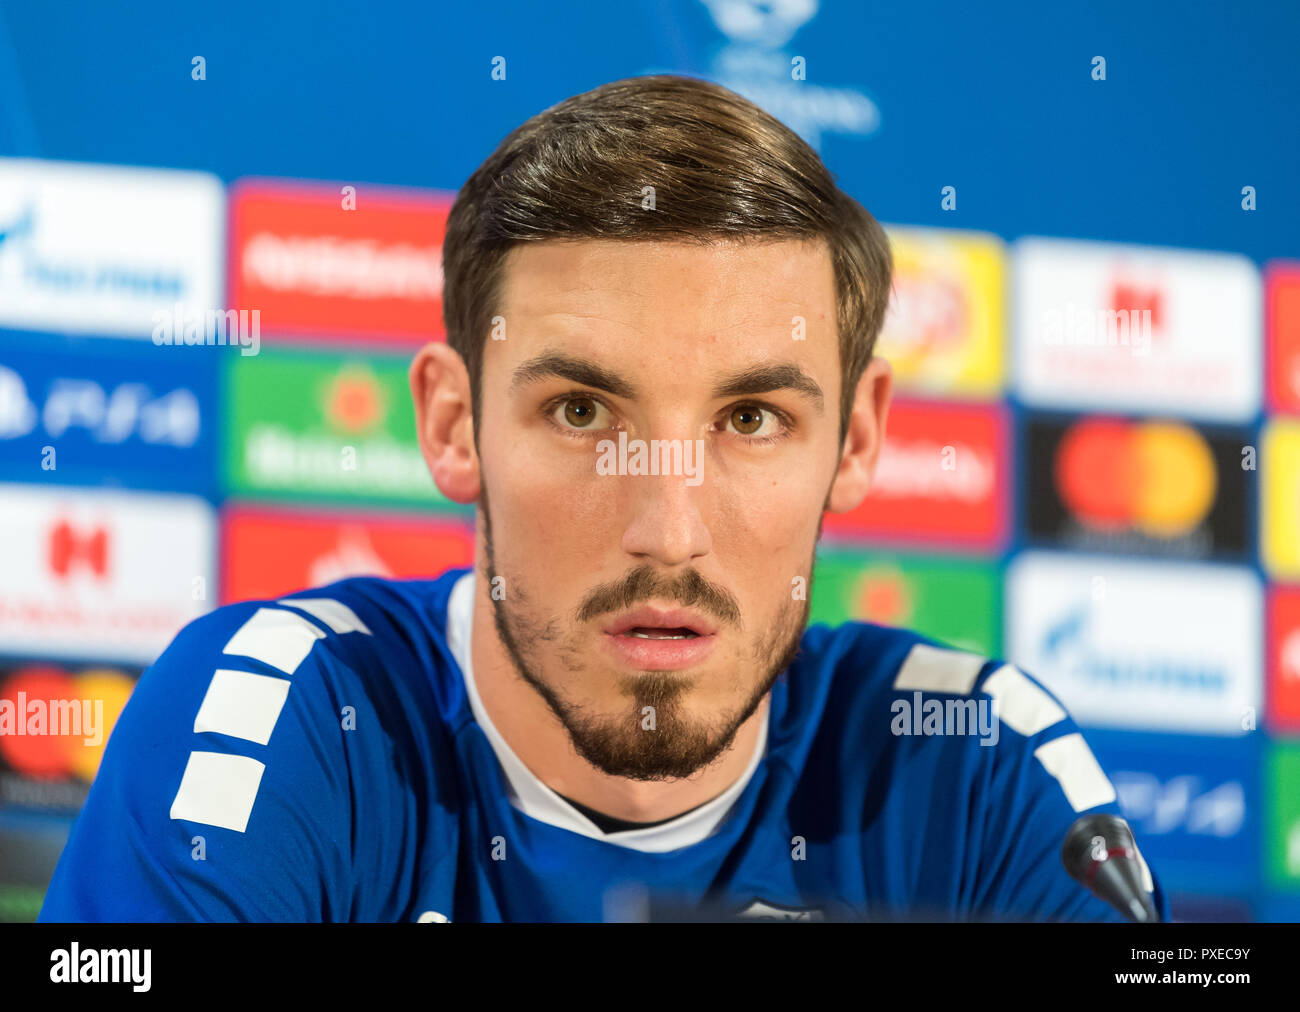 Aek Athens Goalkeeper High Resolution Stock Photography and Images - Alamy